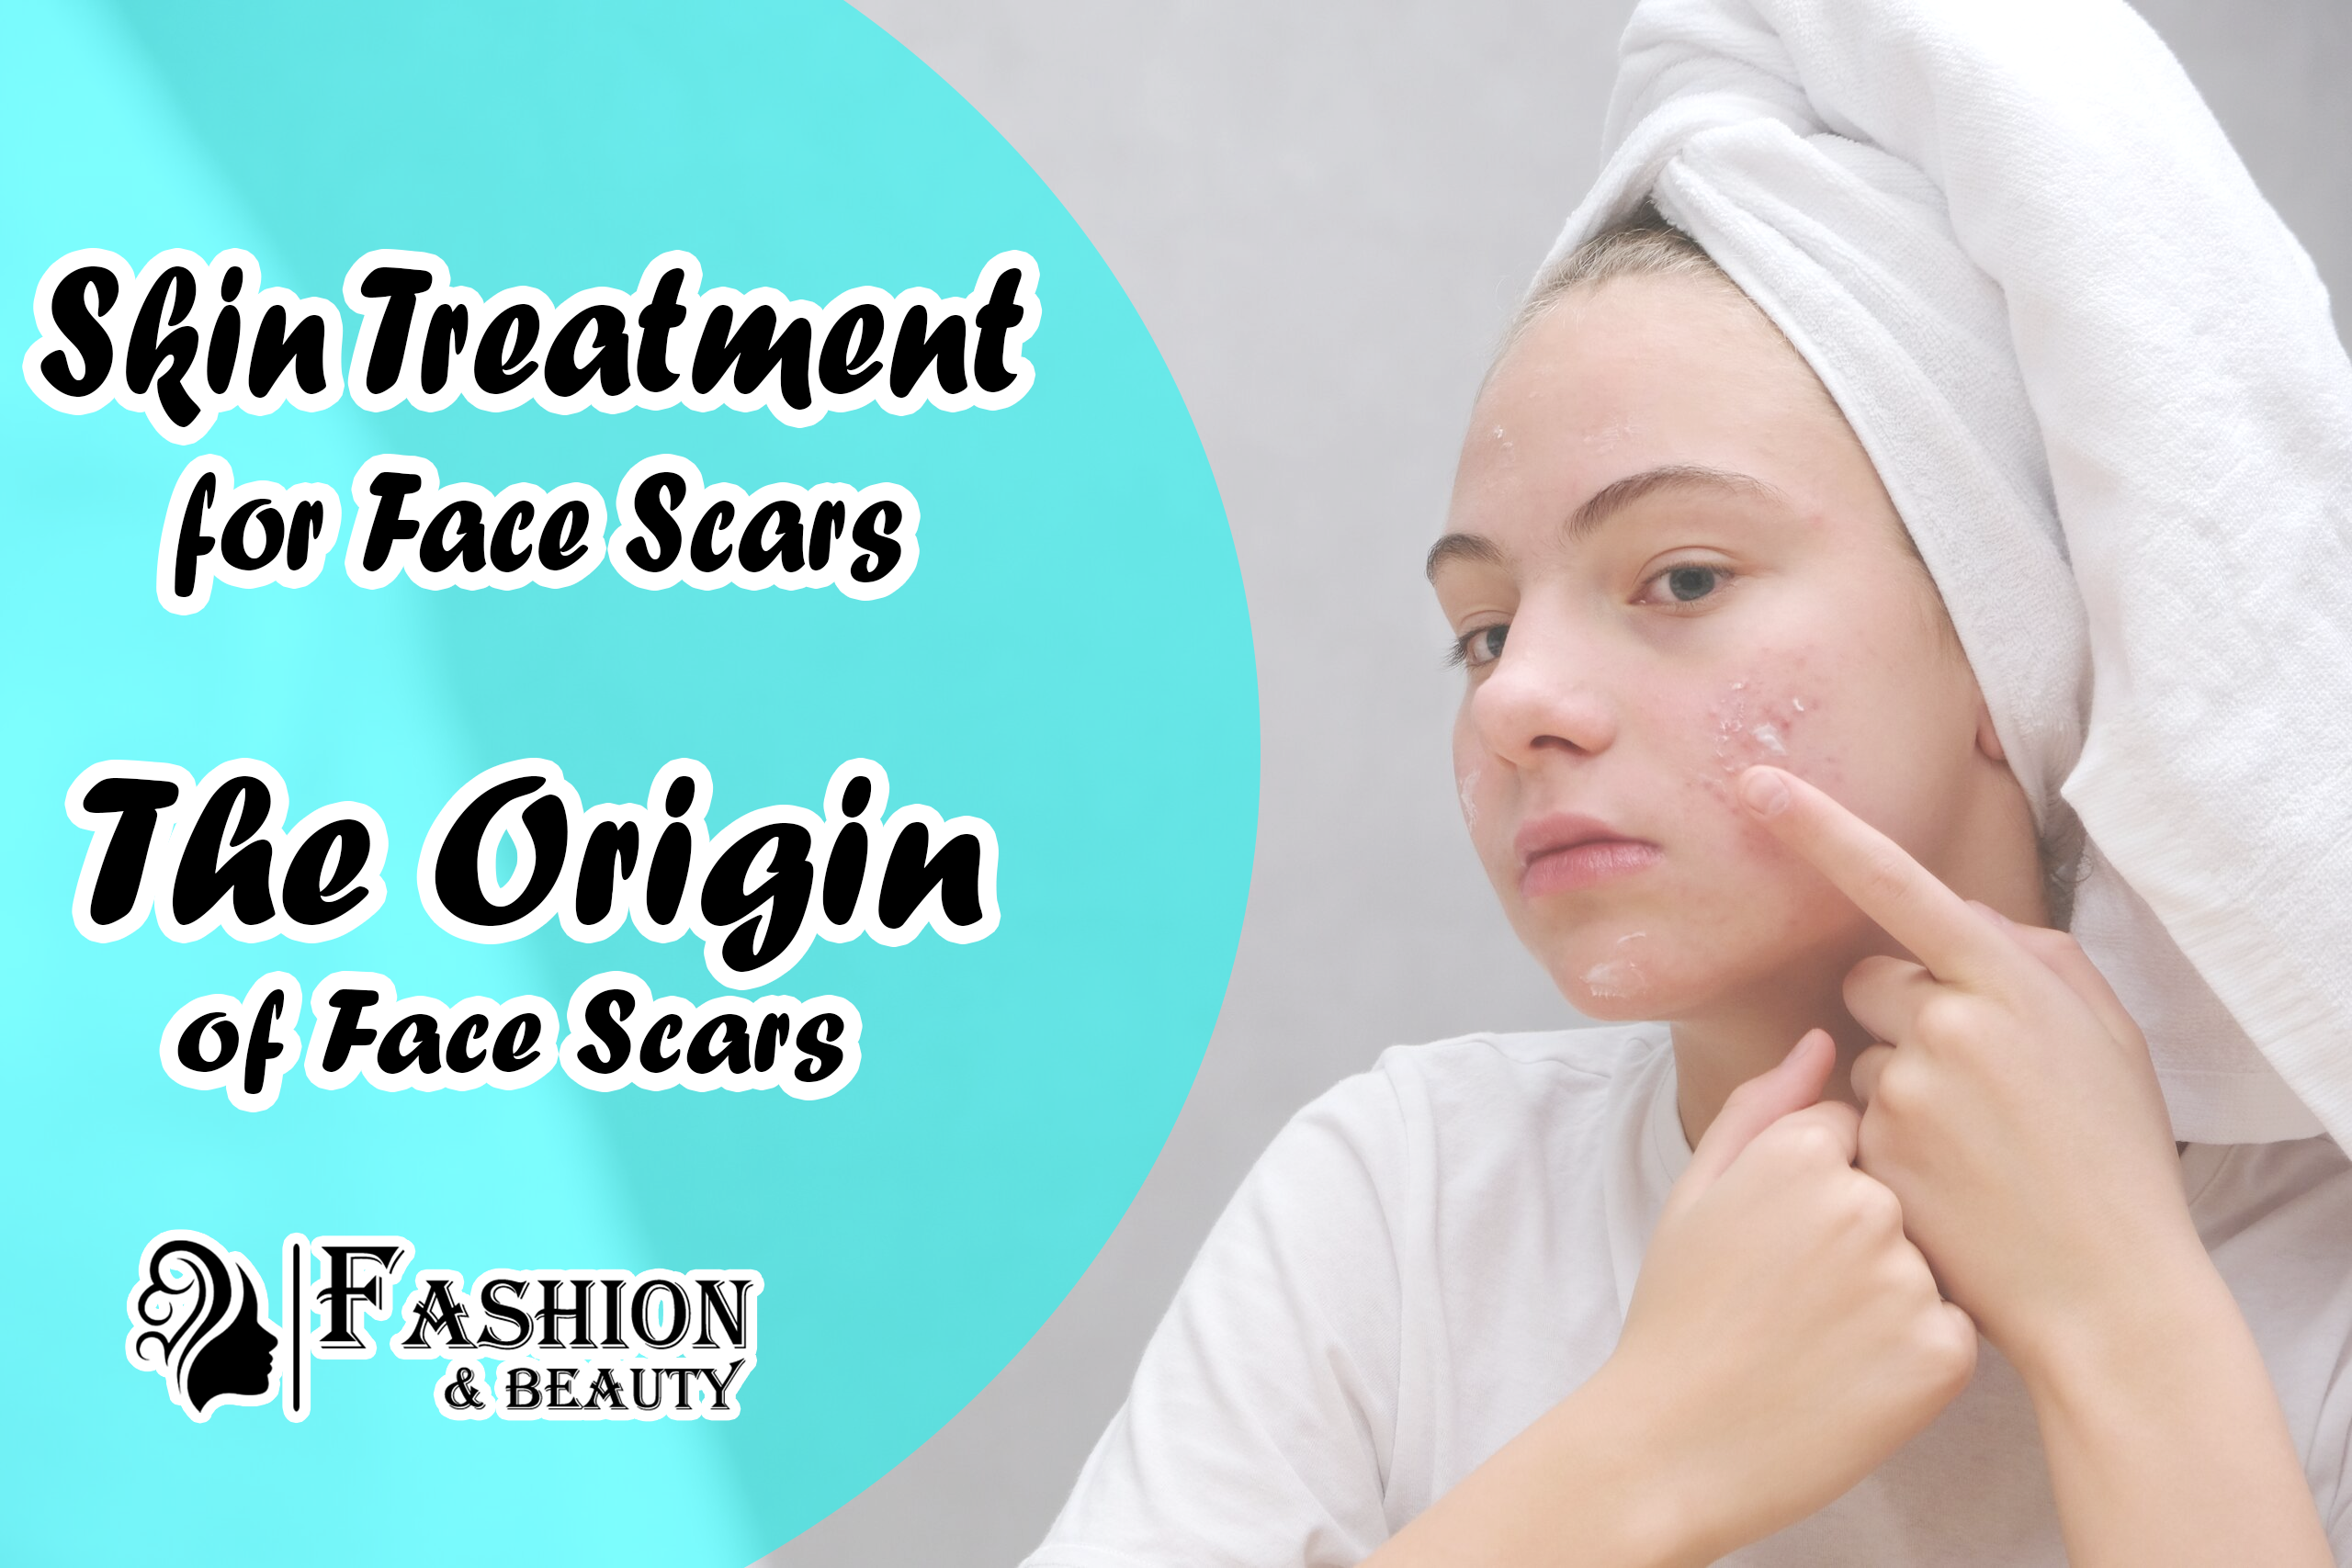 Skin Treatment for Face Scars